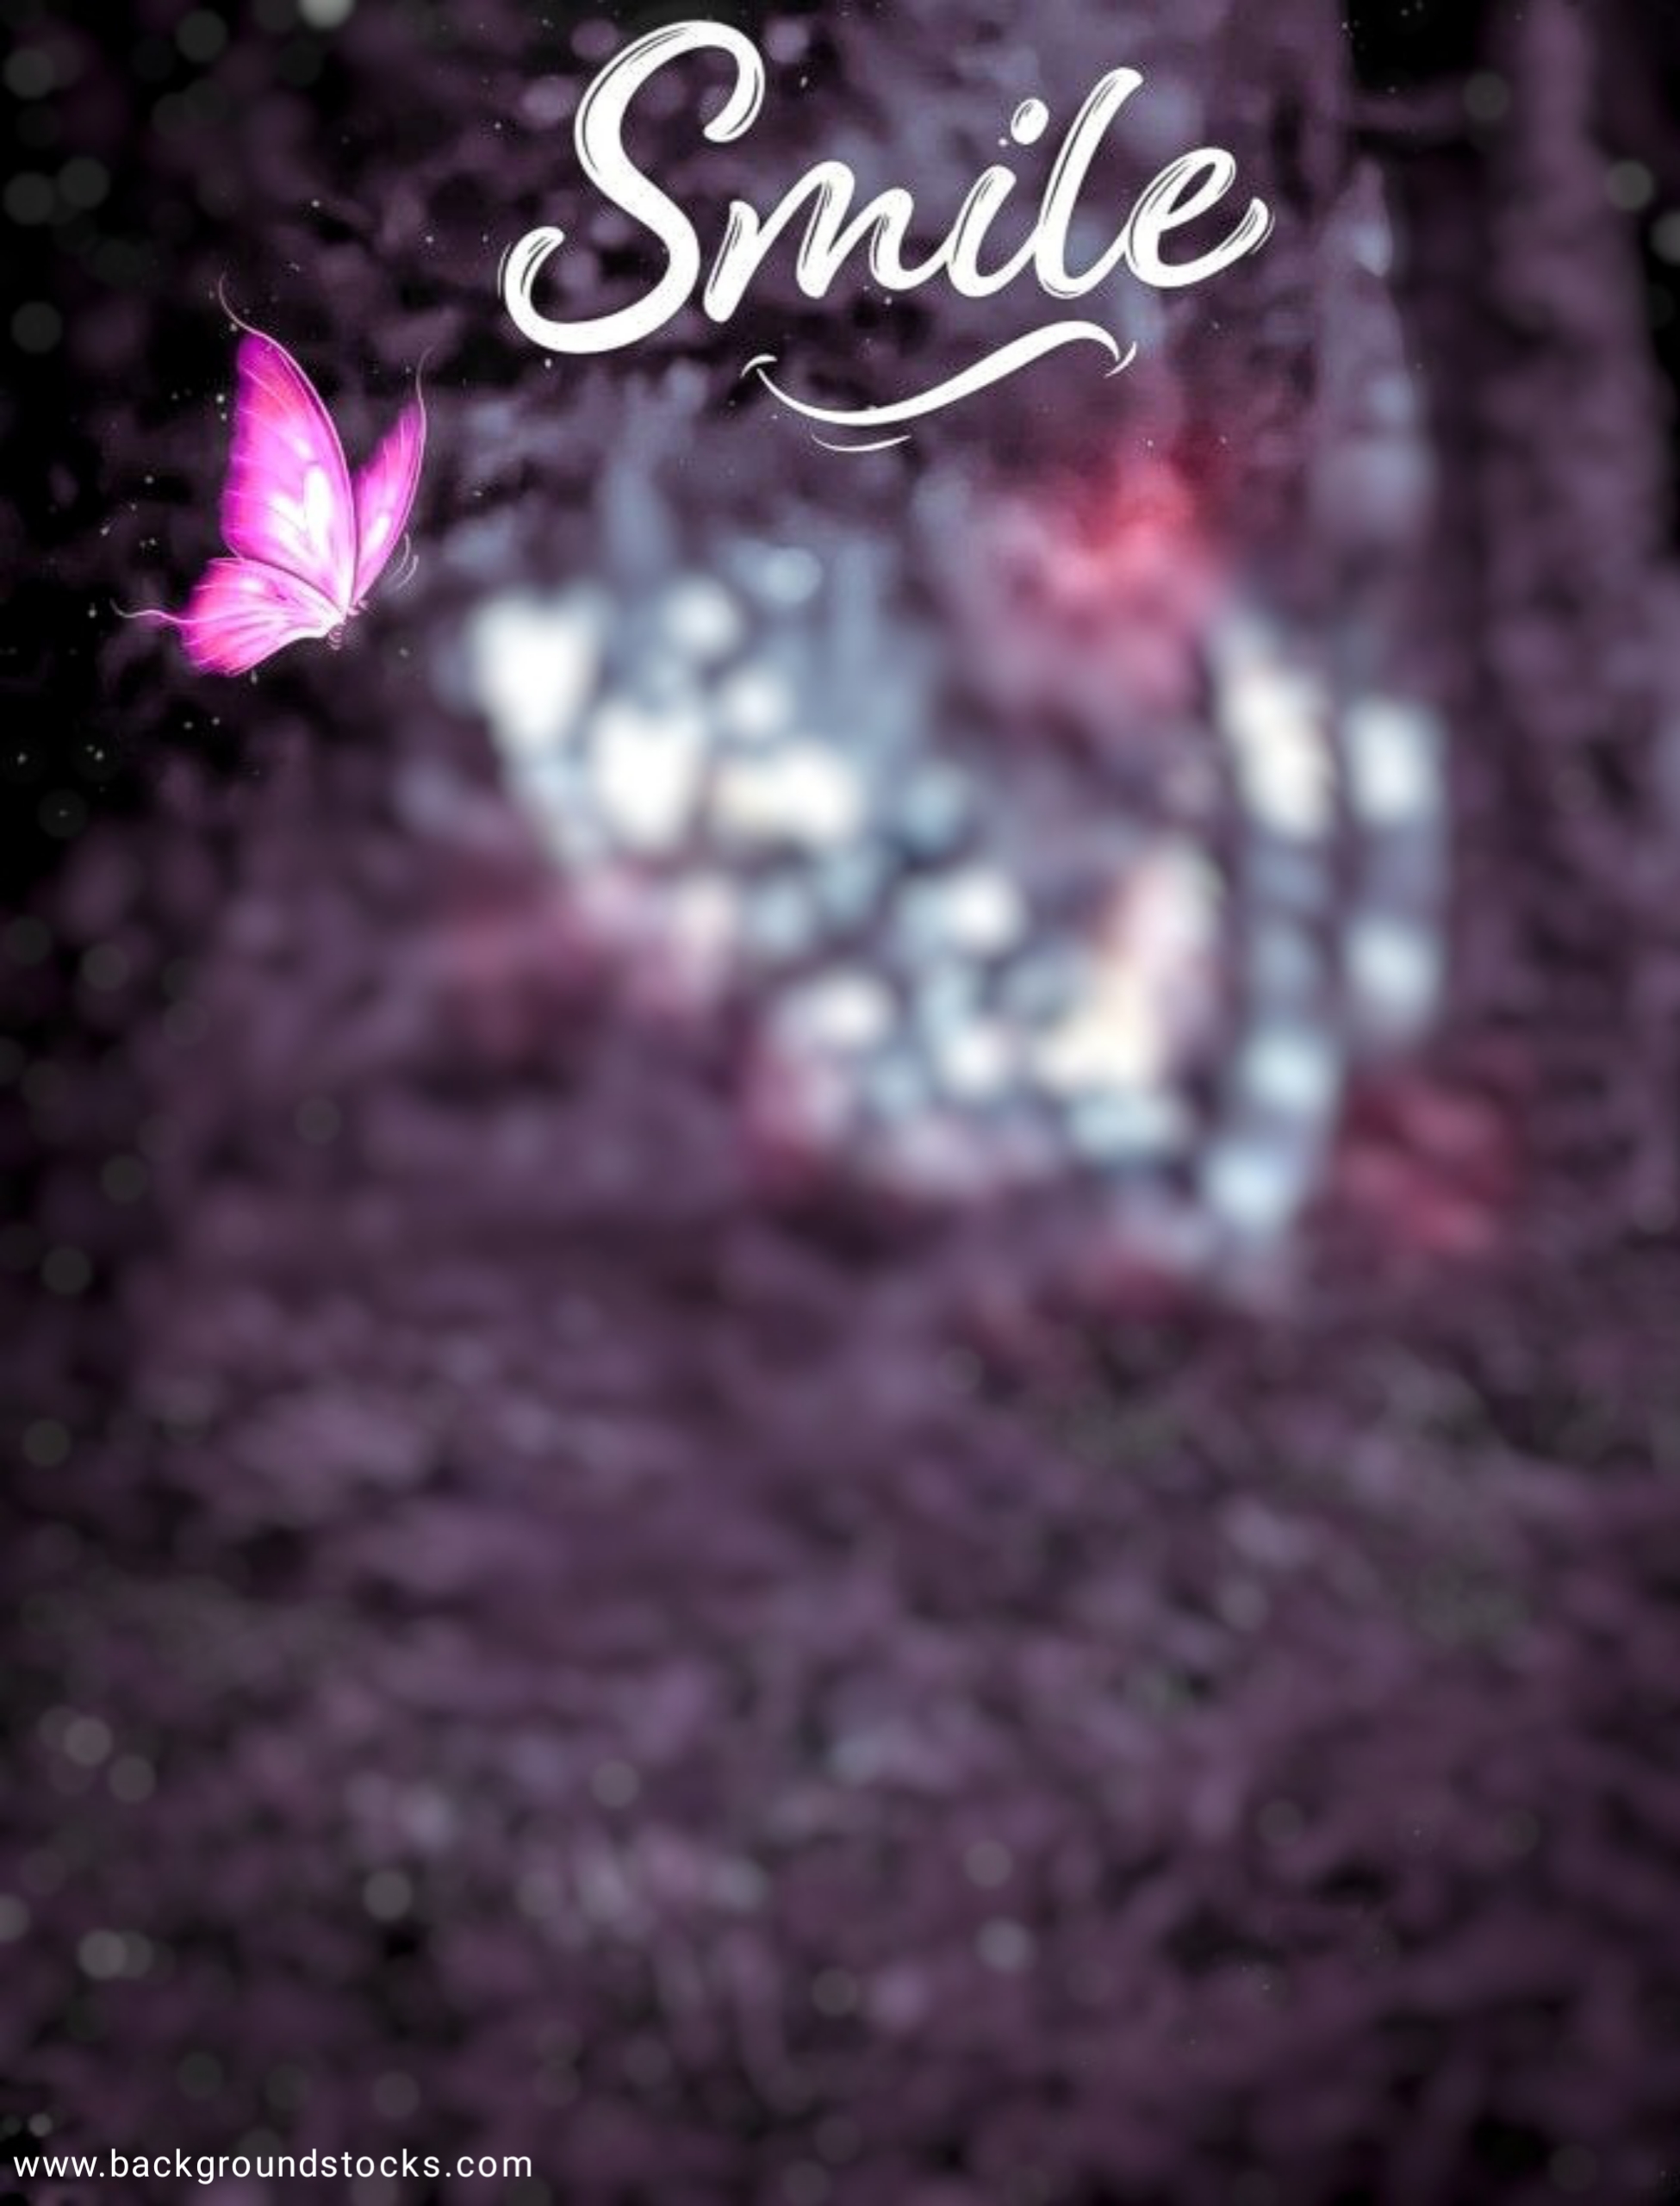 Smile Butterfly CB Background HD Image Download 